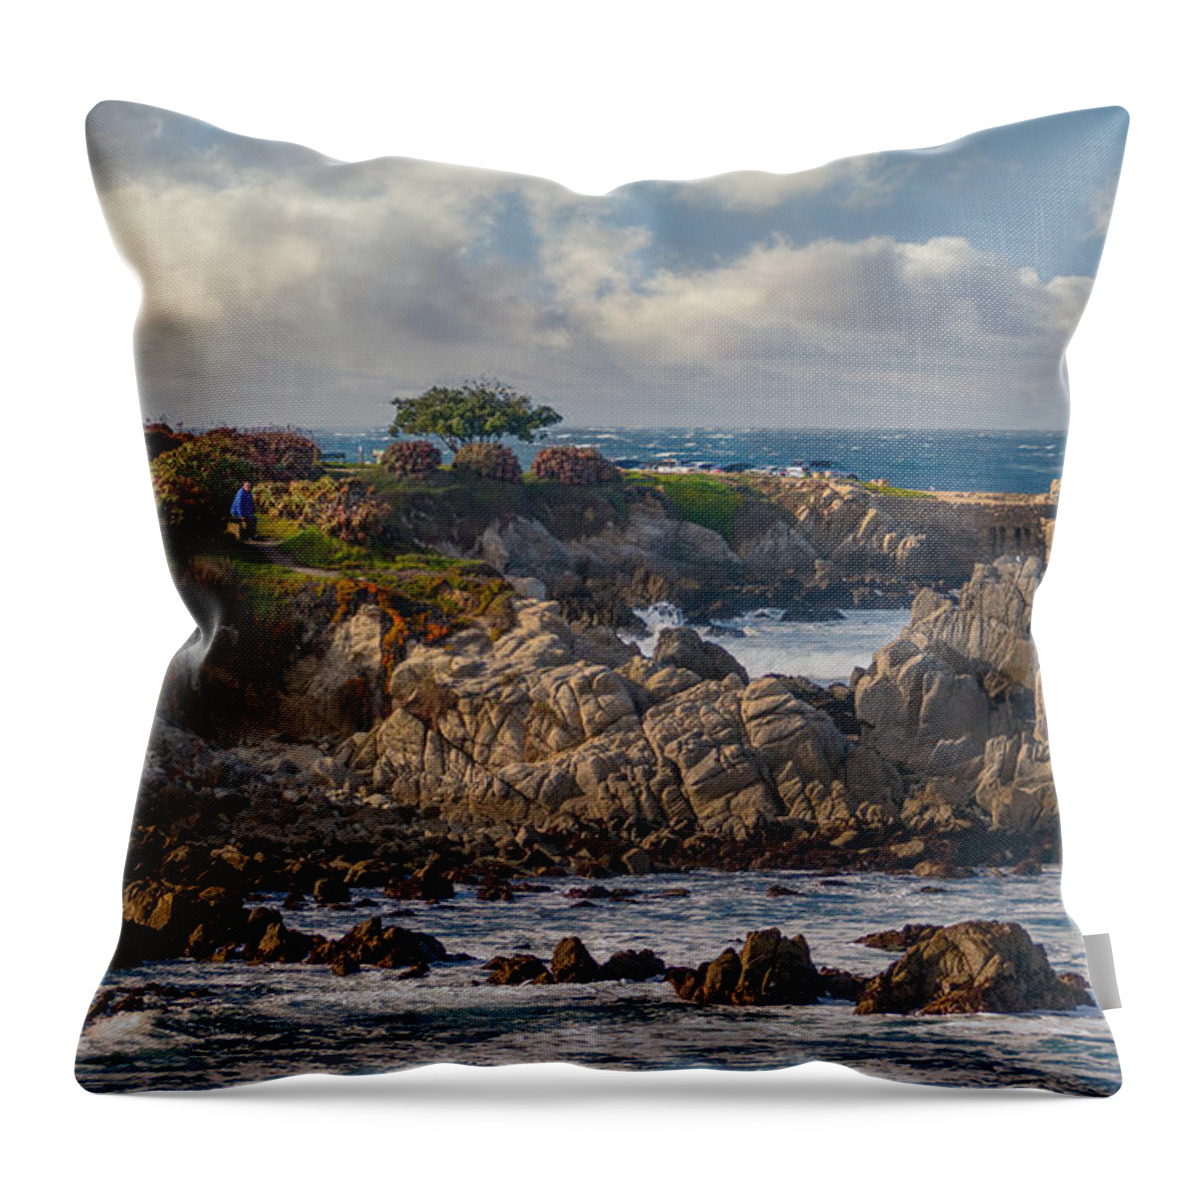 Pacific Grove Throw Pillow featuring the photograph Watching Winter Waves by Derek Dean